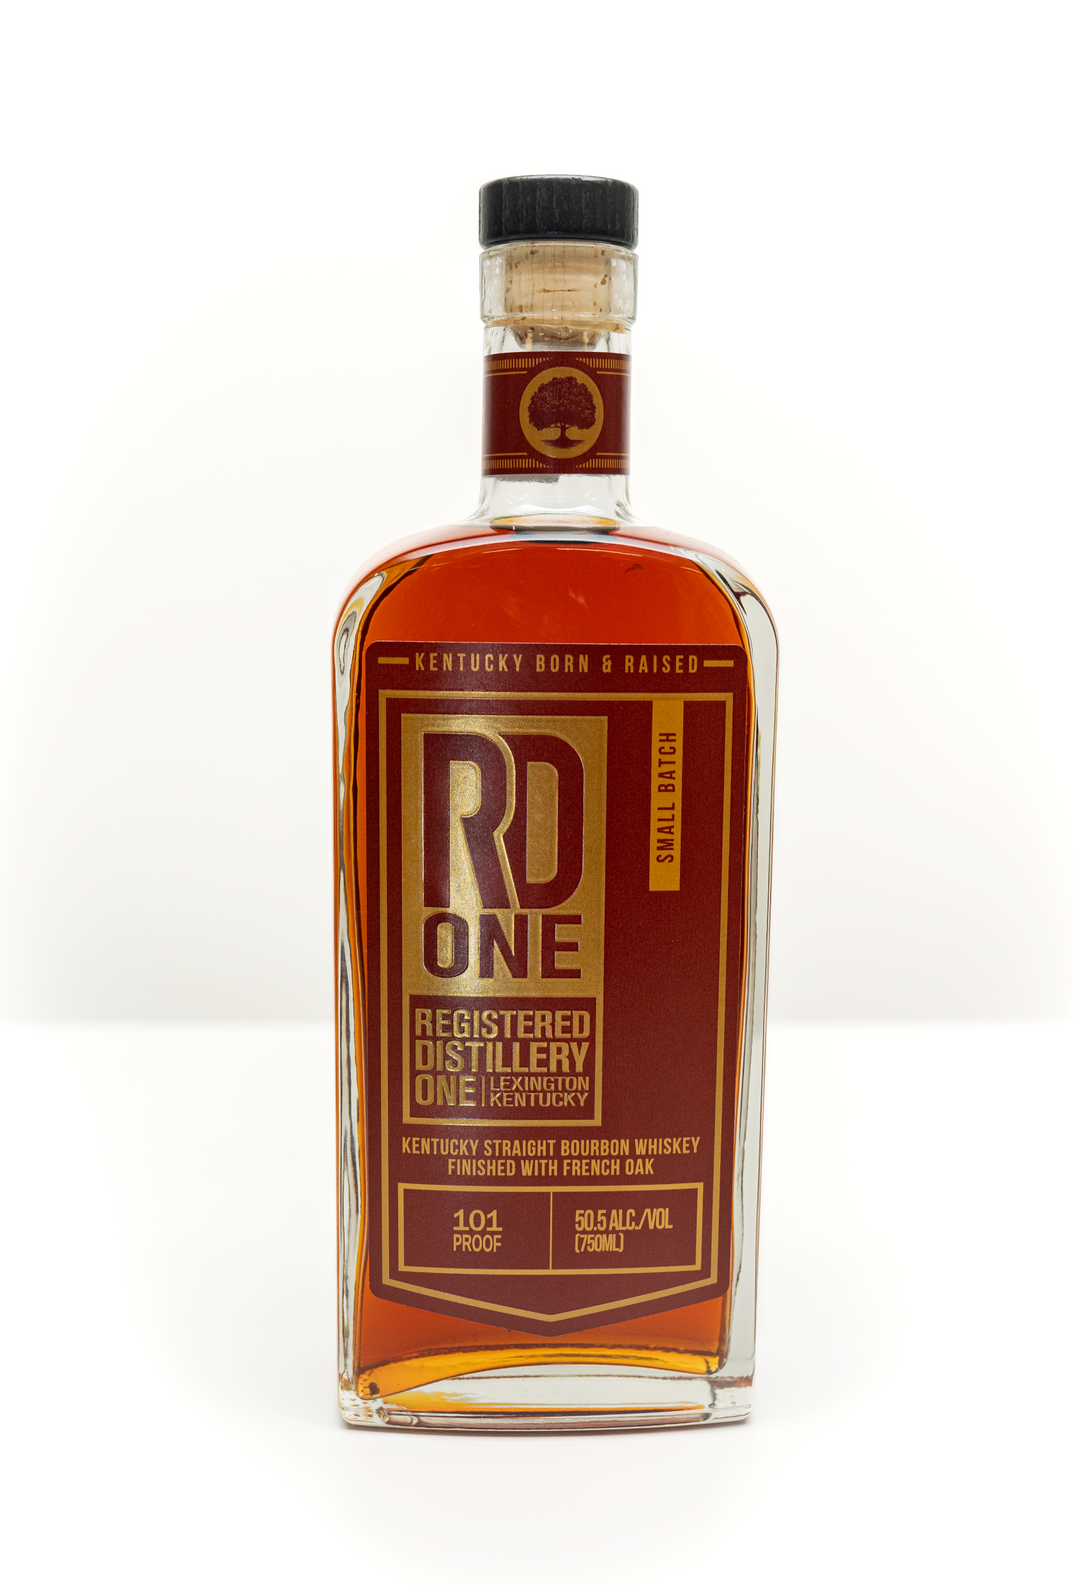 RD One Kentucky Straight Bourbon Finished in French Oak